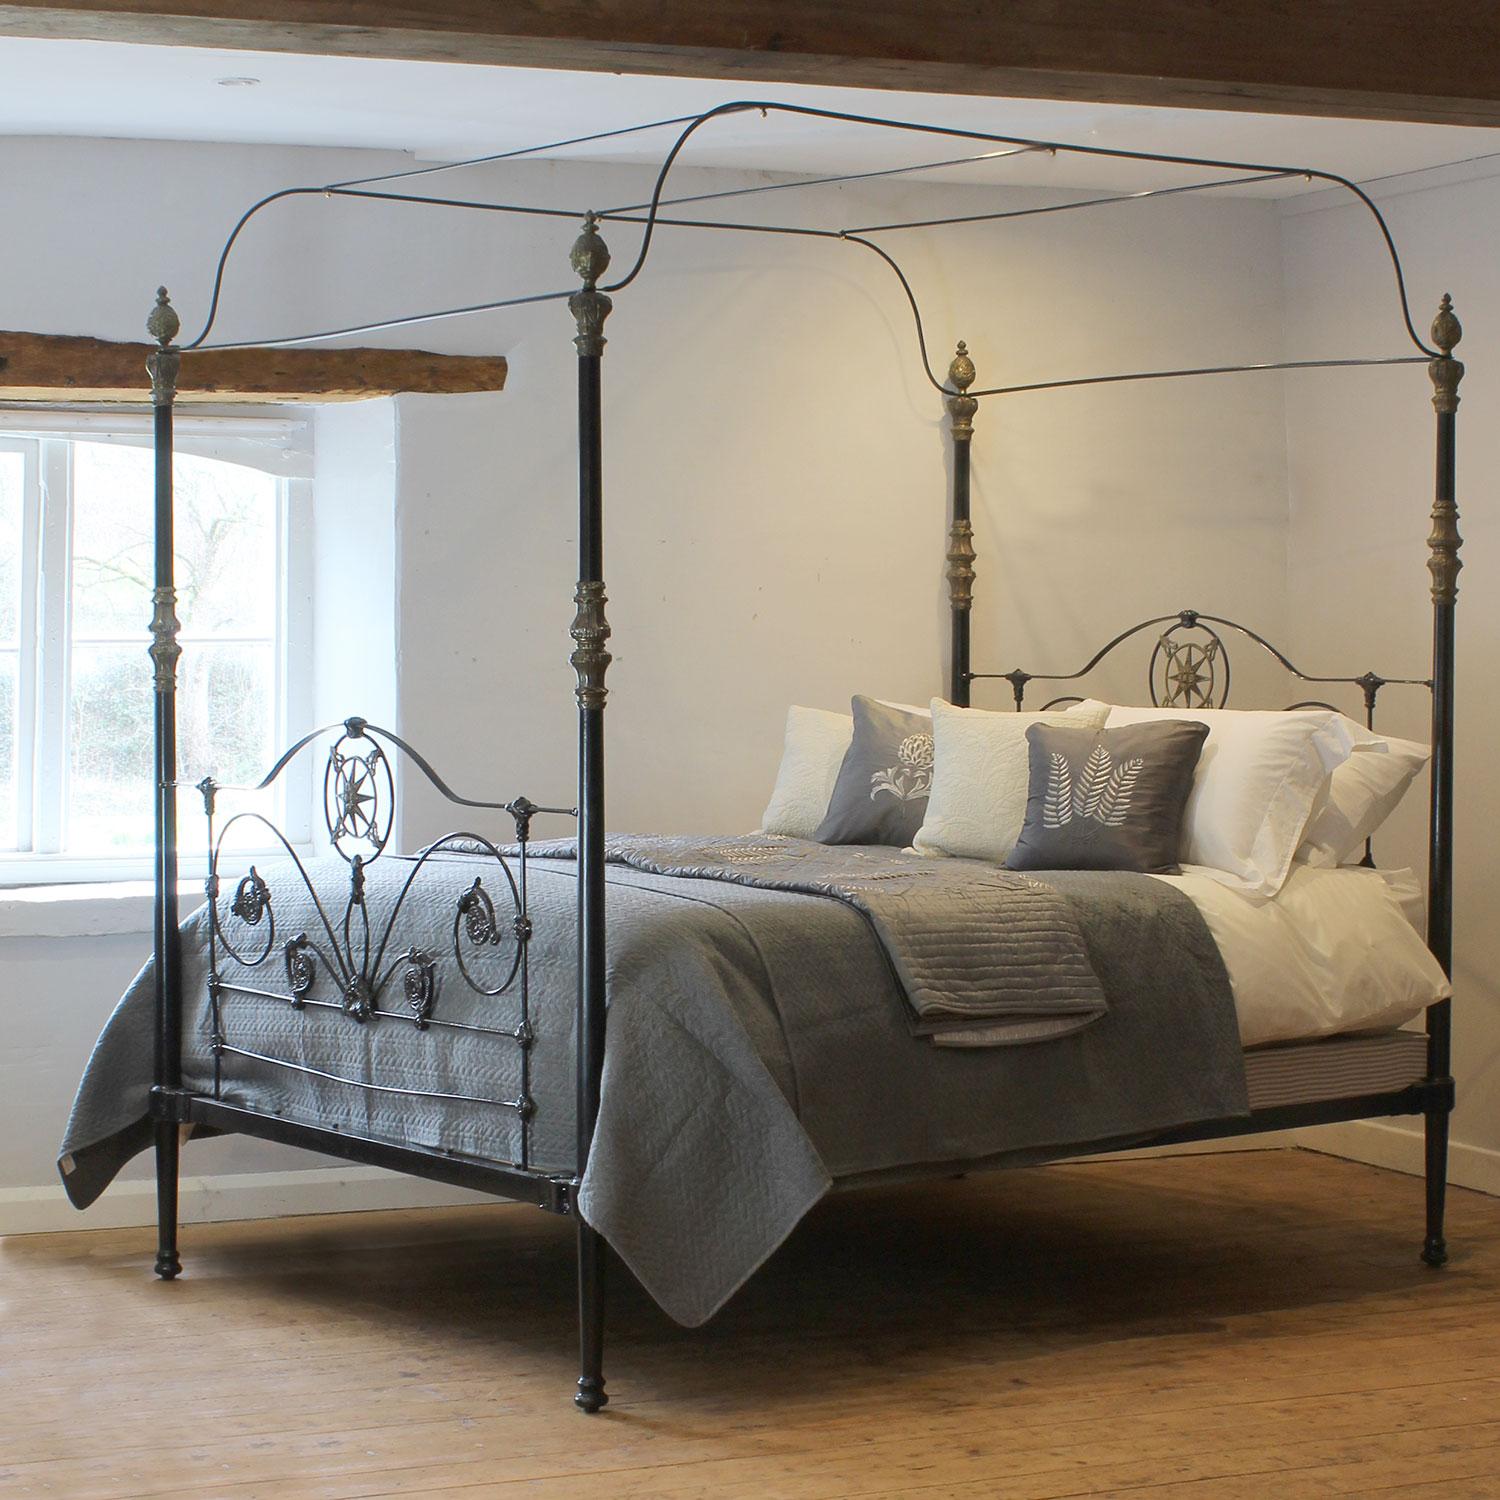 An antique cast iron four poster bed from the late Nineteenth Century, circa 1880. It was manufactured in the UK and shipped to North Africa originally.
The ornate panels at the head and foot of the bed have castings with faded gold lining